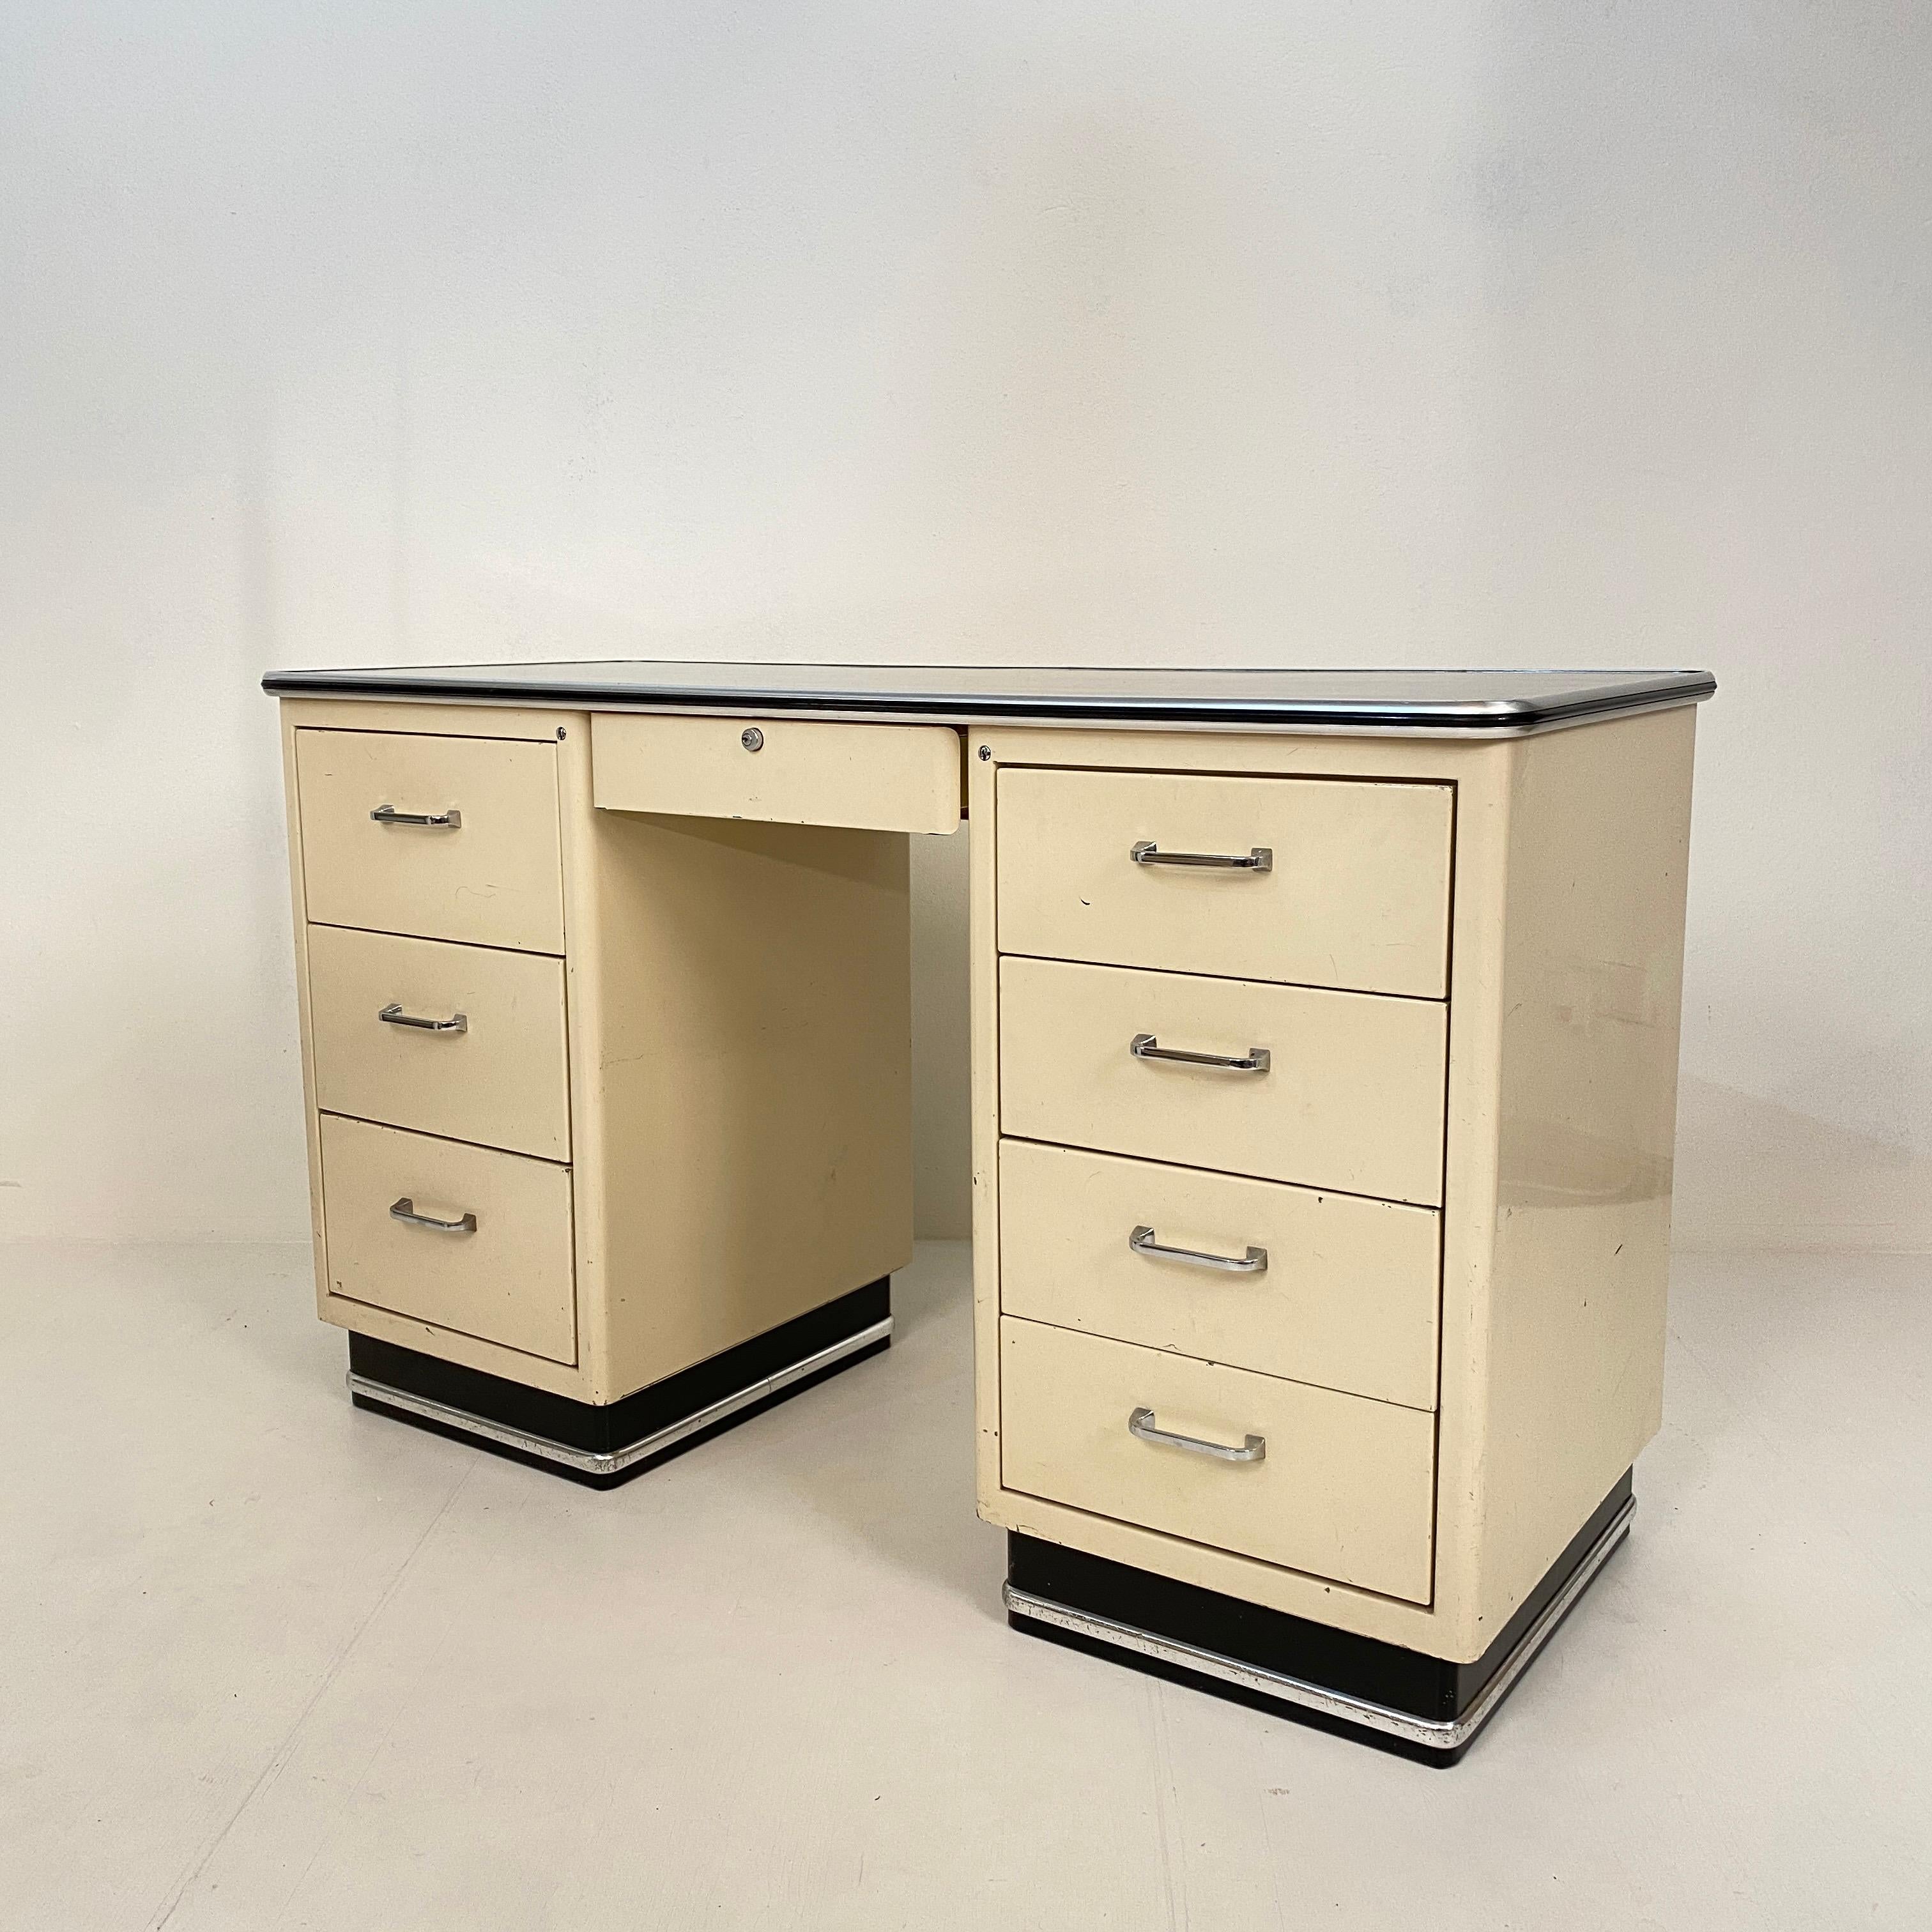 This beautiful 1930s German Bauhaus desk is in its original condition and come directly from the first owner. It was standing in the doctor's office.
It is made out of white lacquered metal, chrome and has got a black linoleum top.
It is in a very